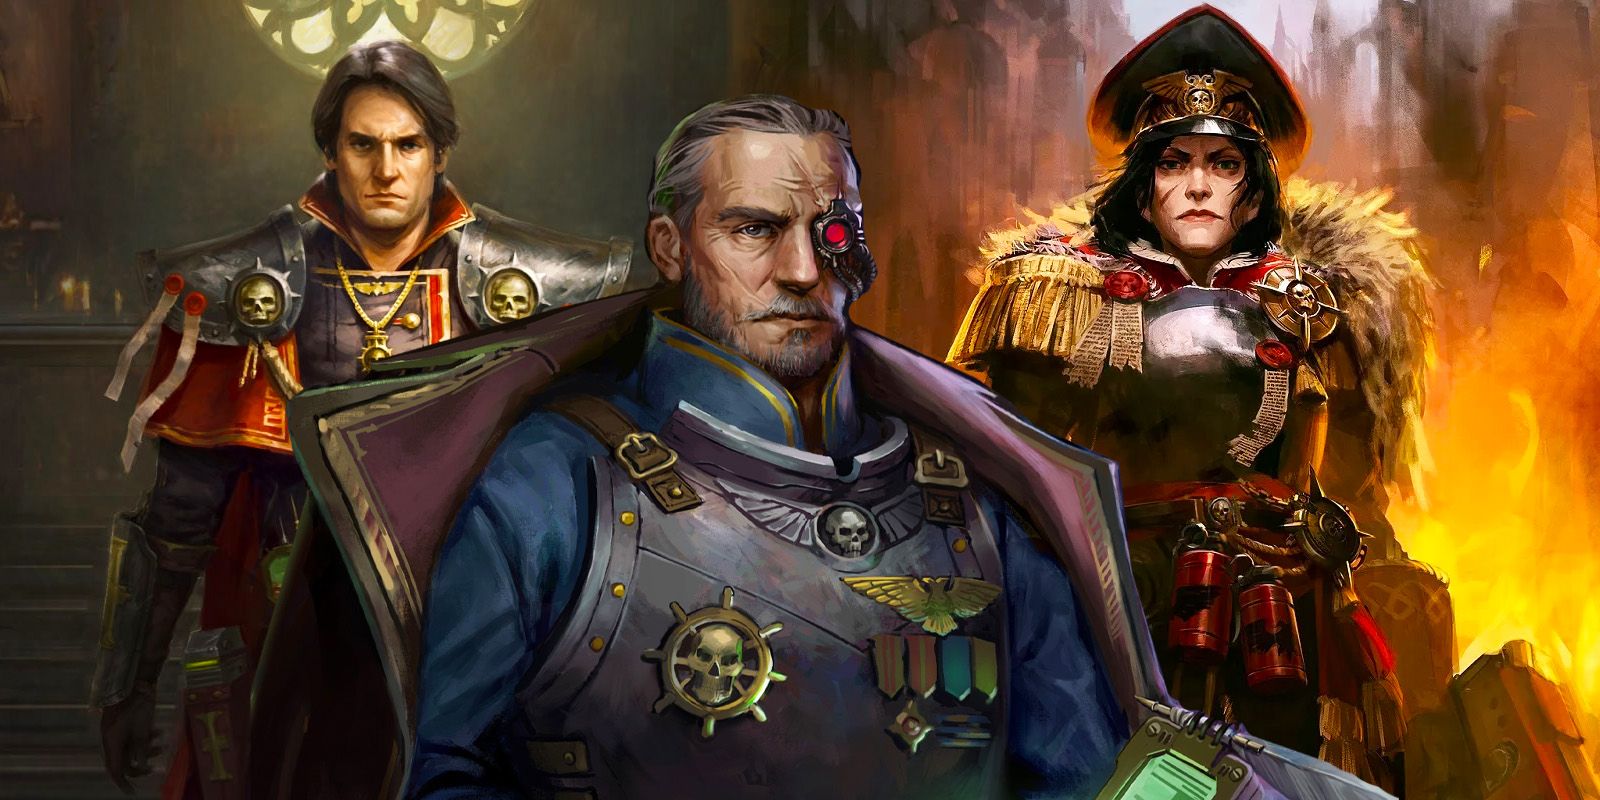 There are four main ways to increase Profit Factor in Warhammer 40,000: Rogue Trader.